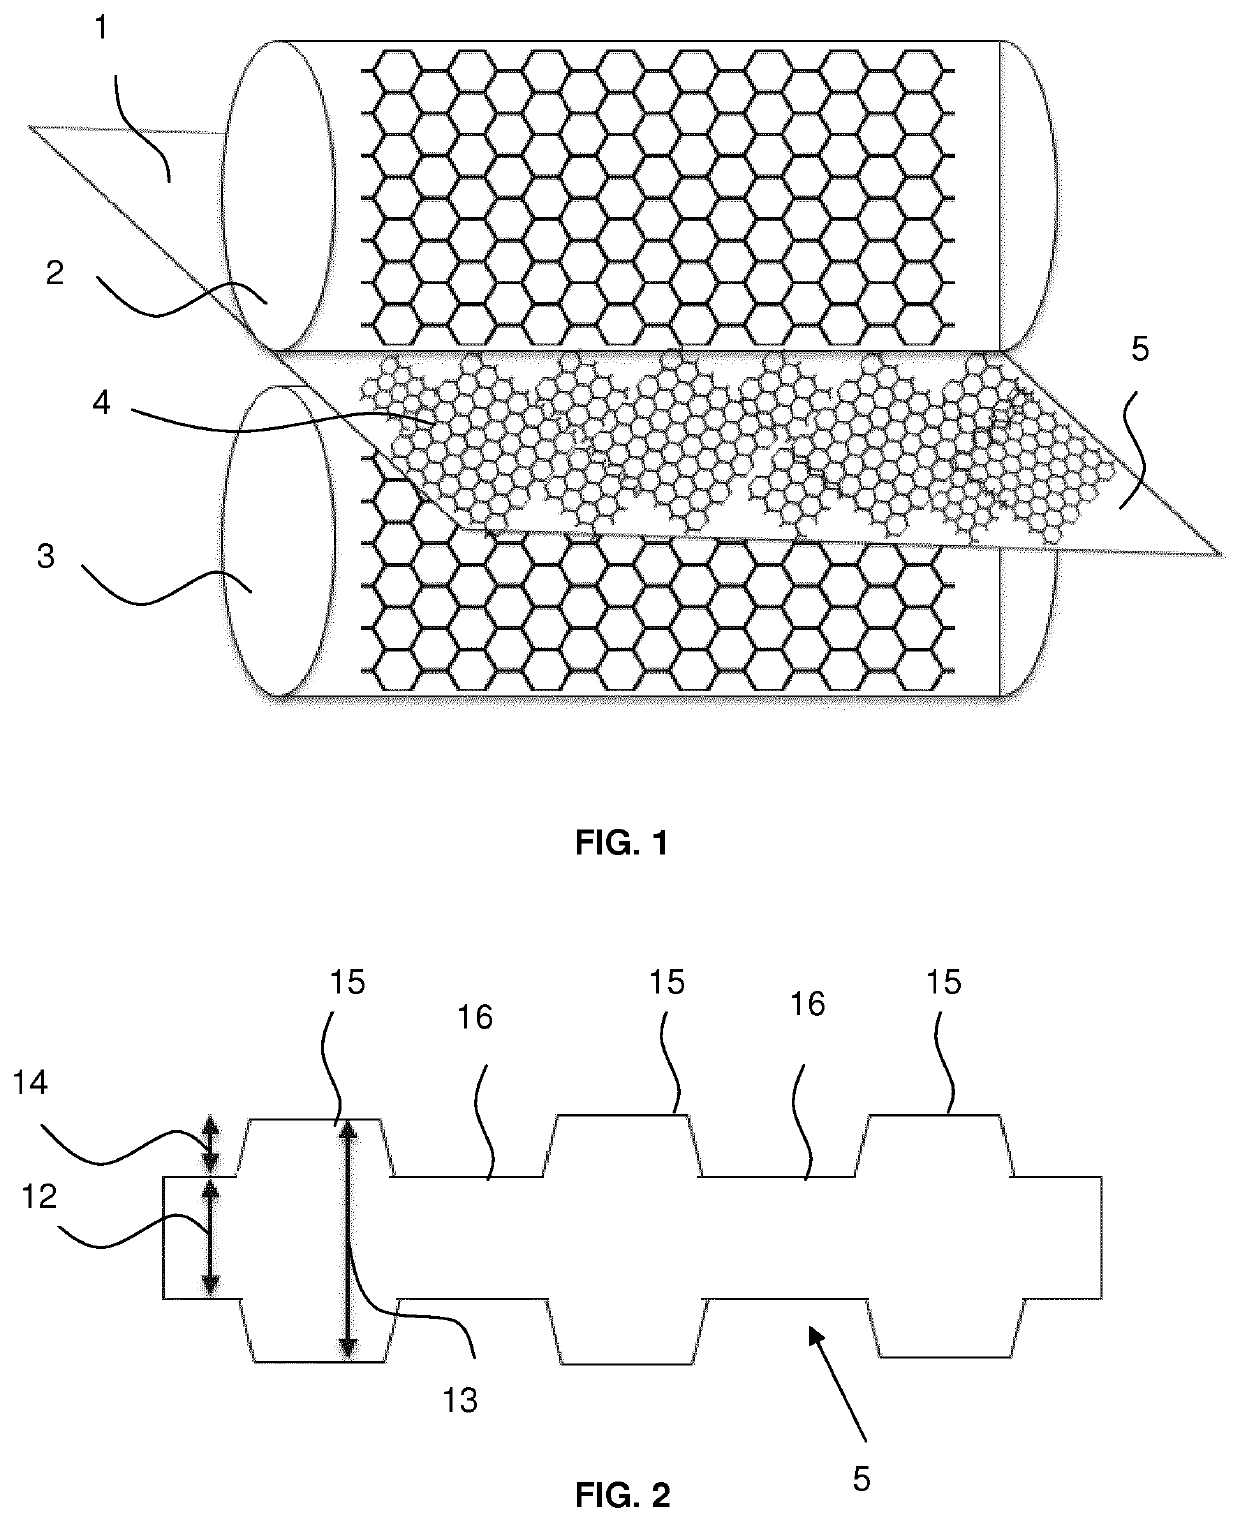 Method for manufacturing a component of austenitic TWIP or TRIP/TWIP steel